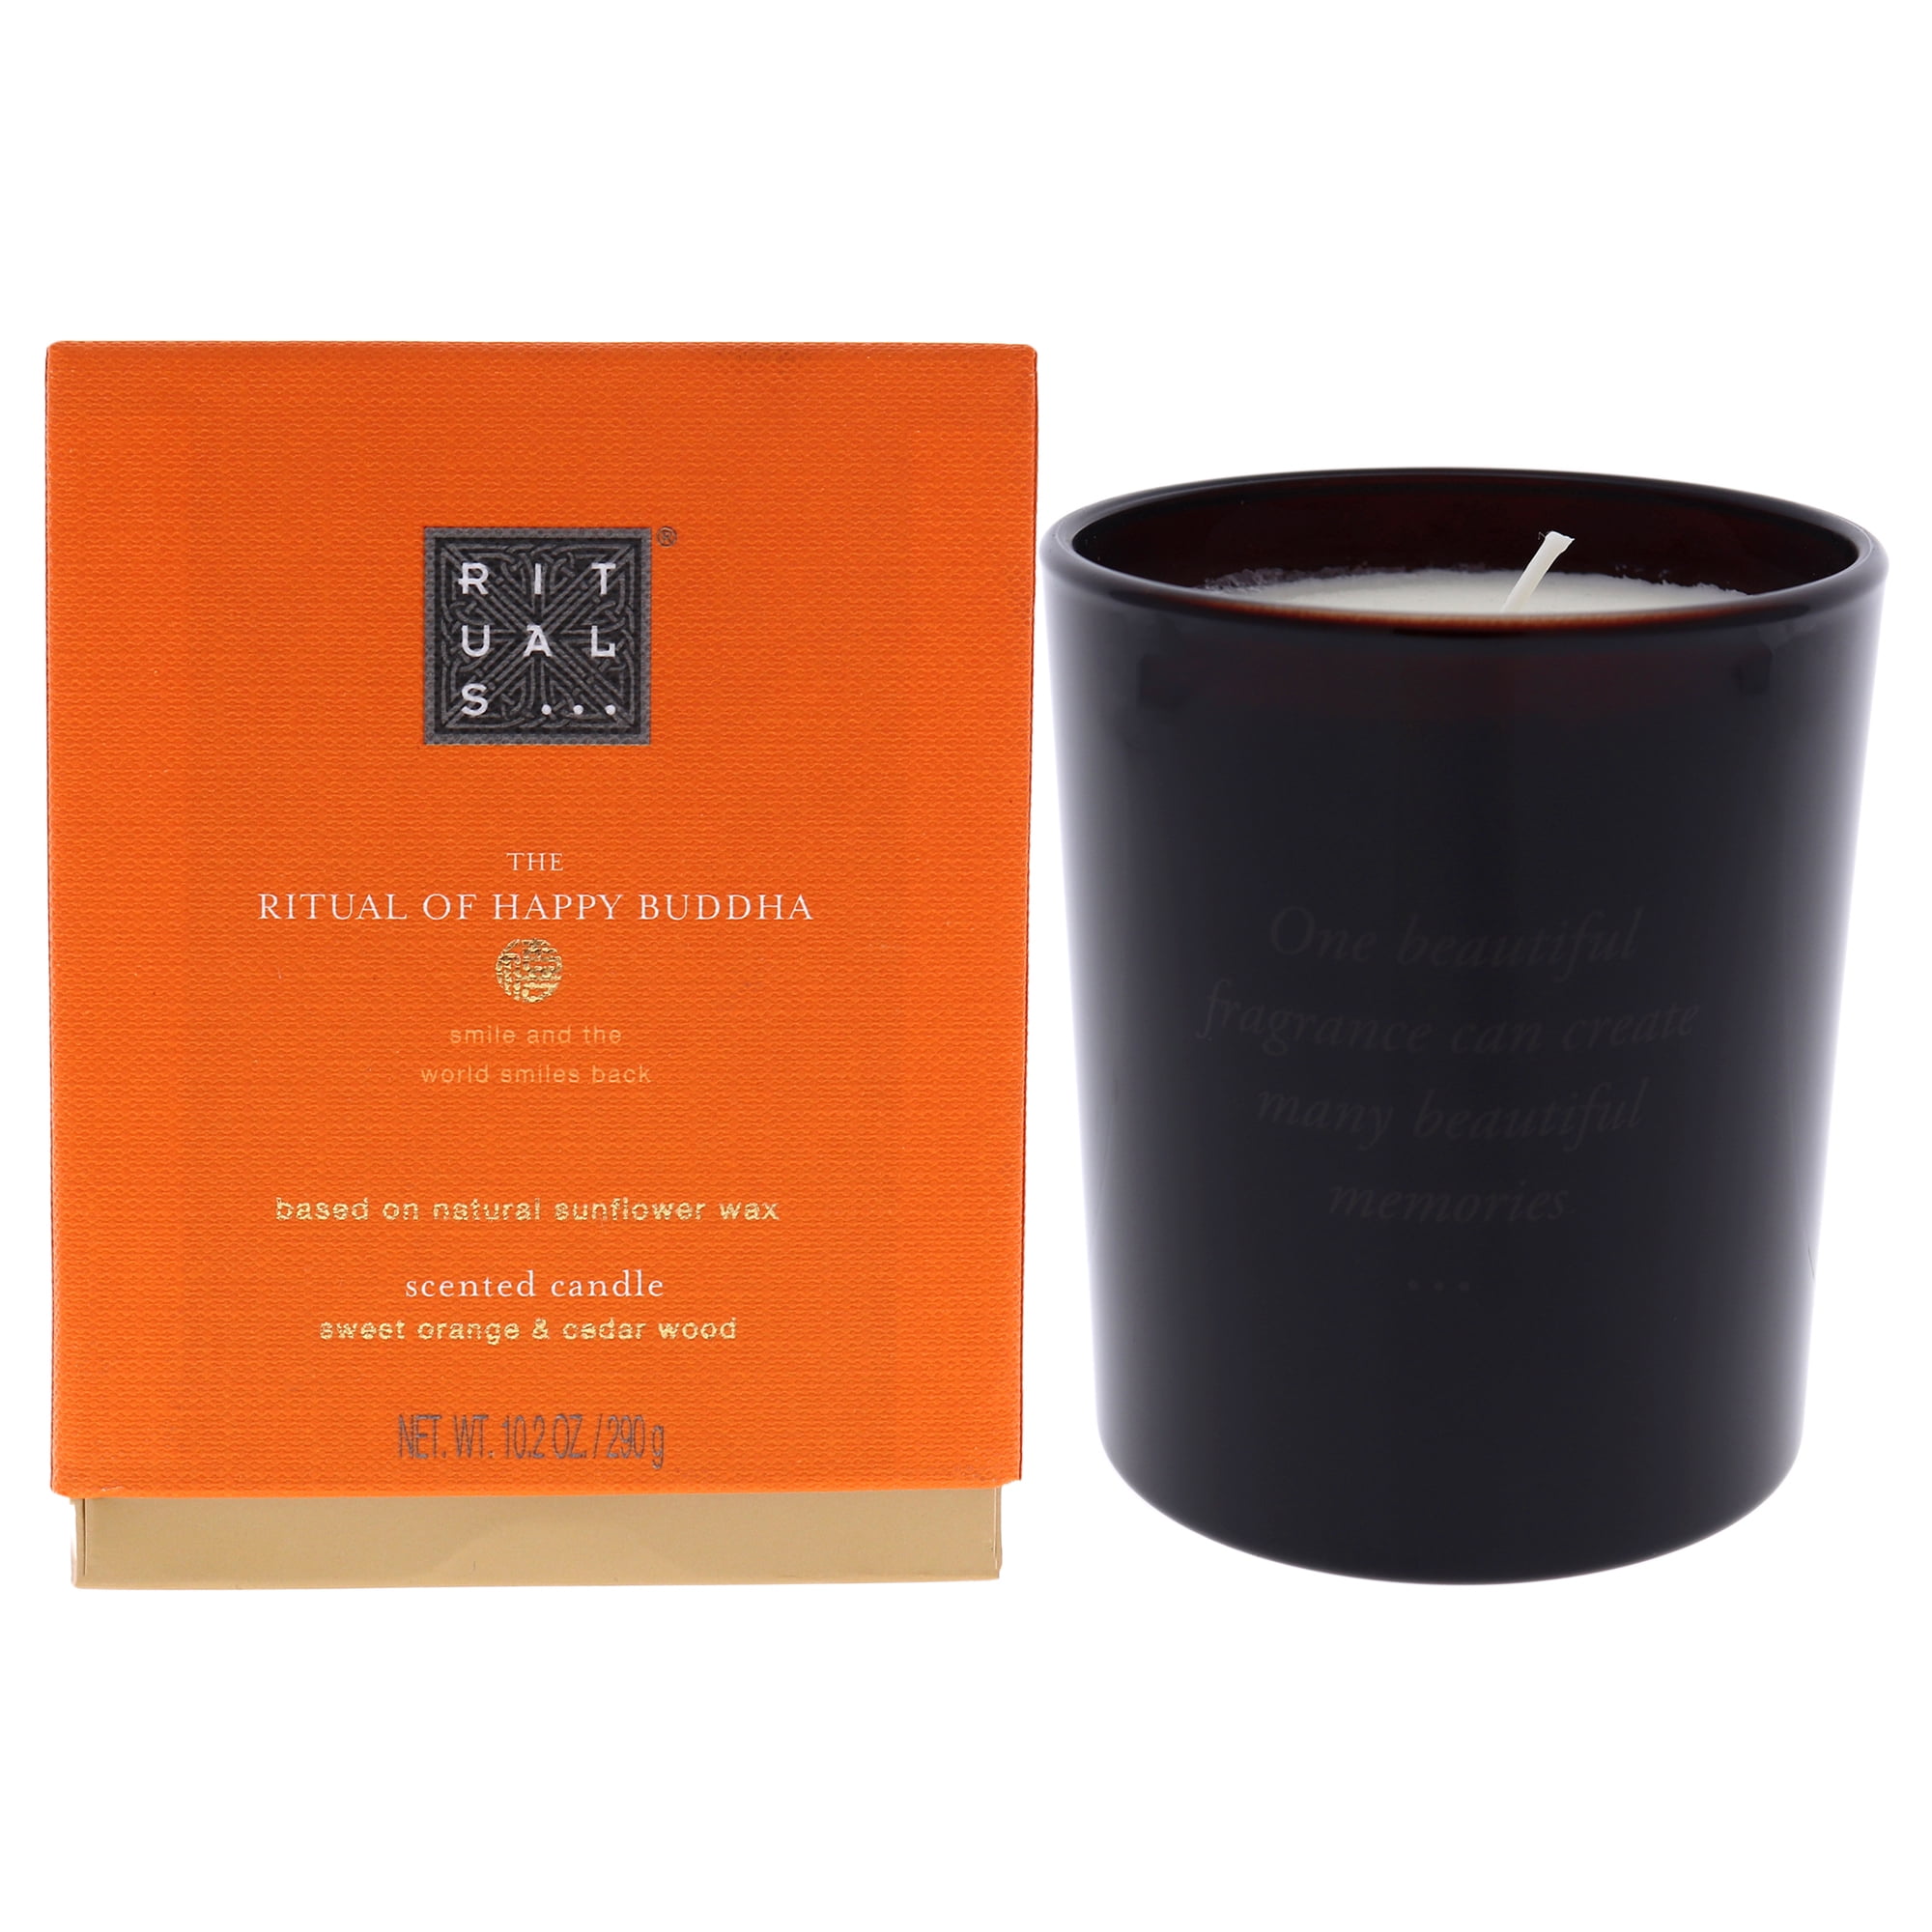 Rituals of Happy Buddha Scented Candle for Unisex, 10.2 oz